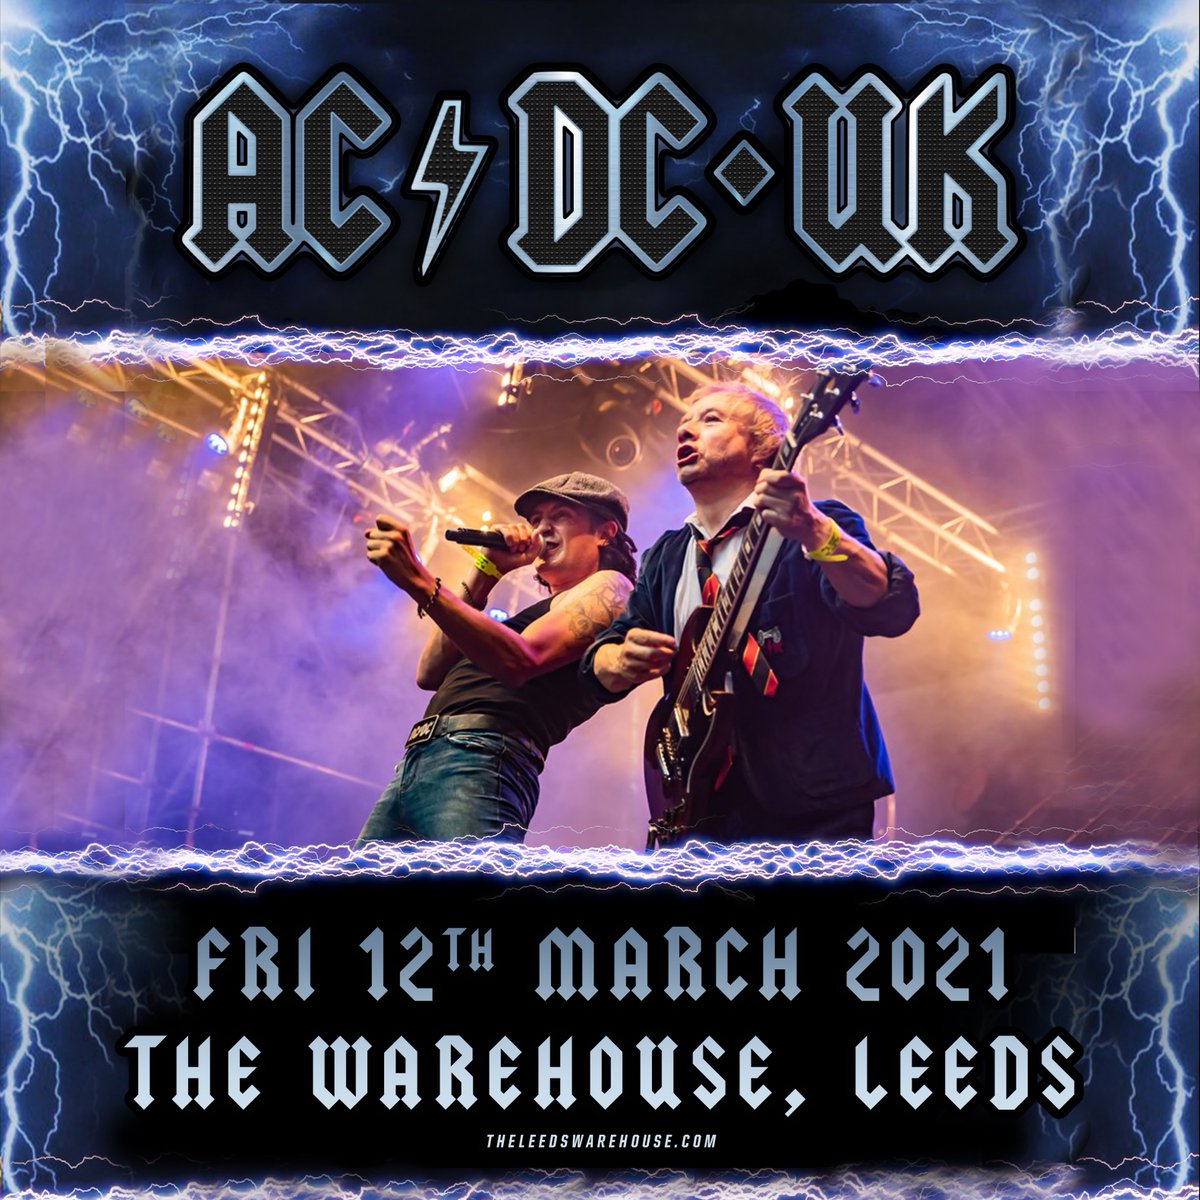 Tickets for AD/DC UK show at the Warehouse, Leeds on the 12th of March 2022 are running low. Don't be disappointed, get your tickets now 🎫⏰🎵 bit.ly/3HWJTN5